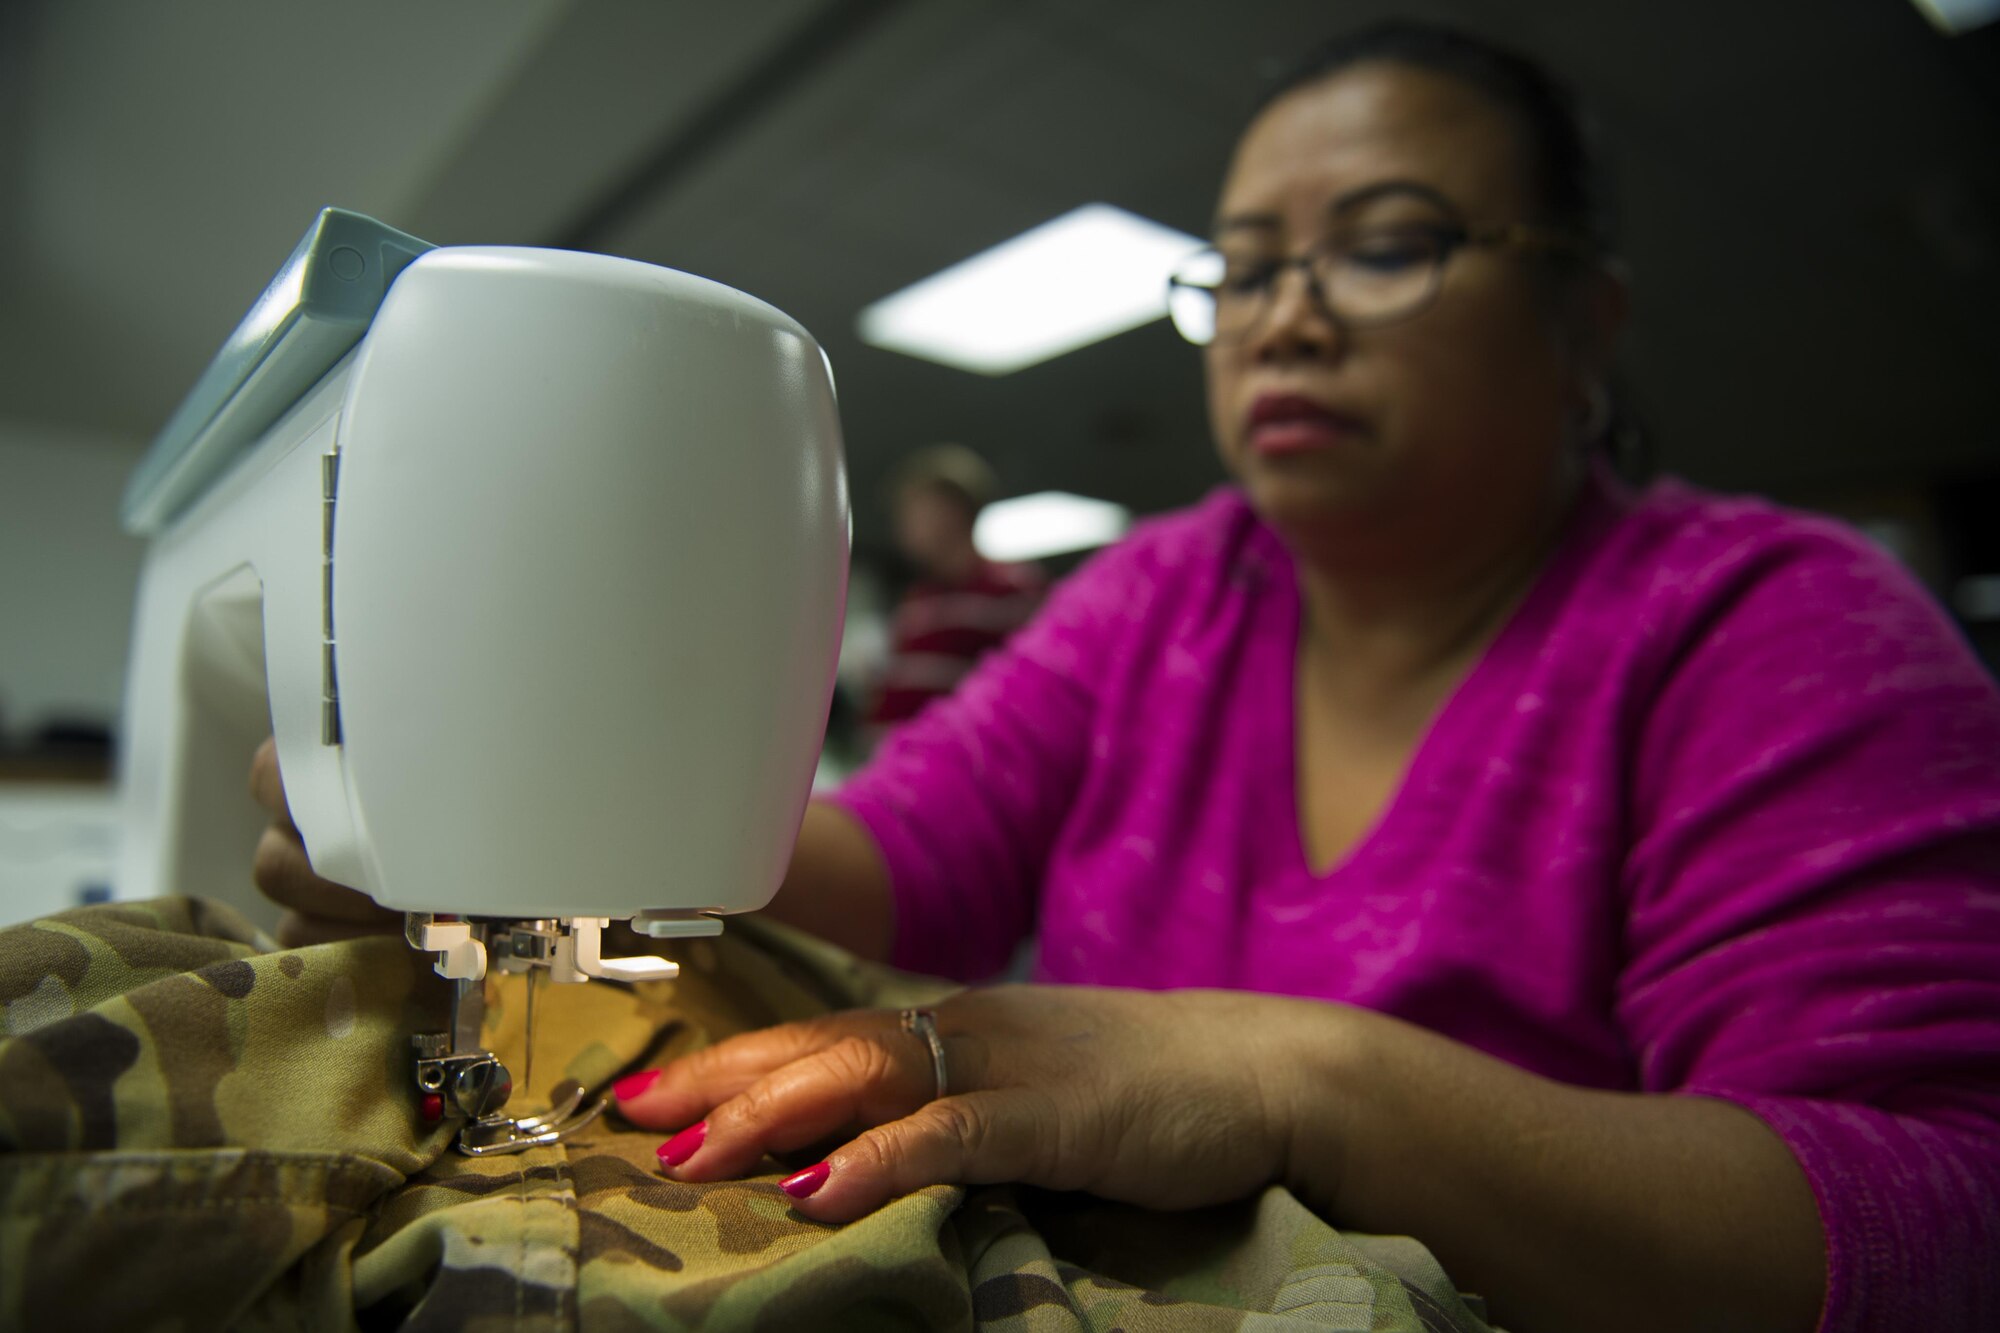 Tessie Porter, a Munch ‘n Mend volunteer, sews a uniform at Hurlburt Field, Fla., Jan. 9, 2017. Munch n’ Mend is a free monthly event where Air Commandos of all rank, enlisted and officer, can take their uniforms to get rank, badges, name and Air Force tapes sewn on while enjoying a hot meal. (U.S. Air Force photo by Airman 1st Class Joseph Pick)